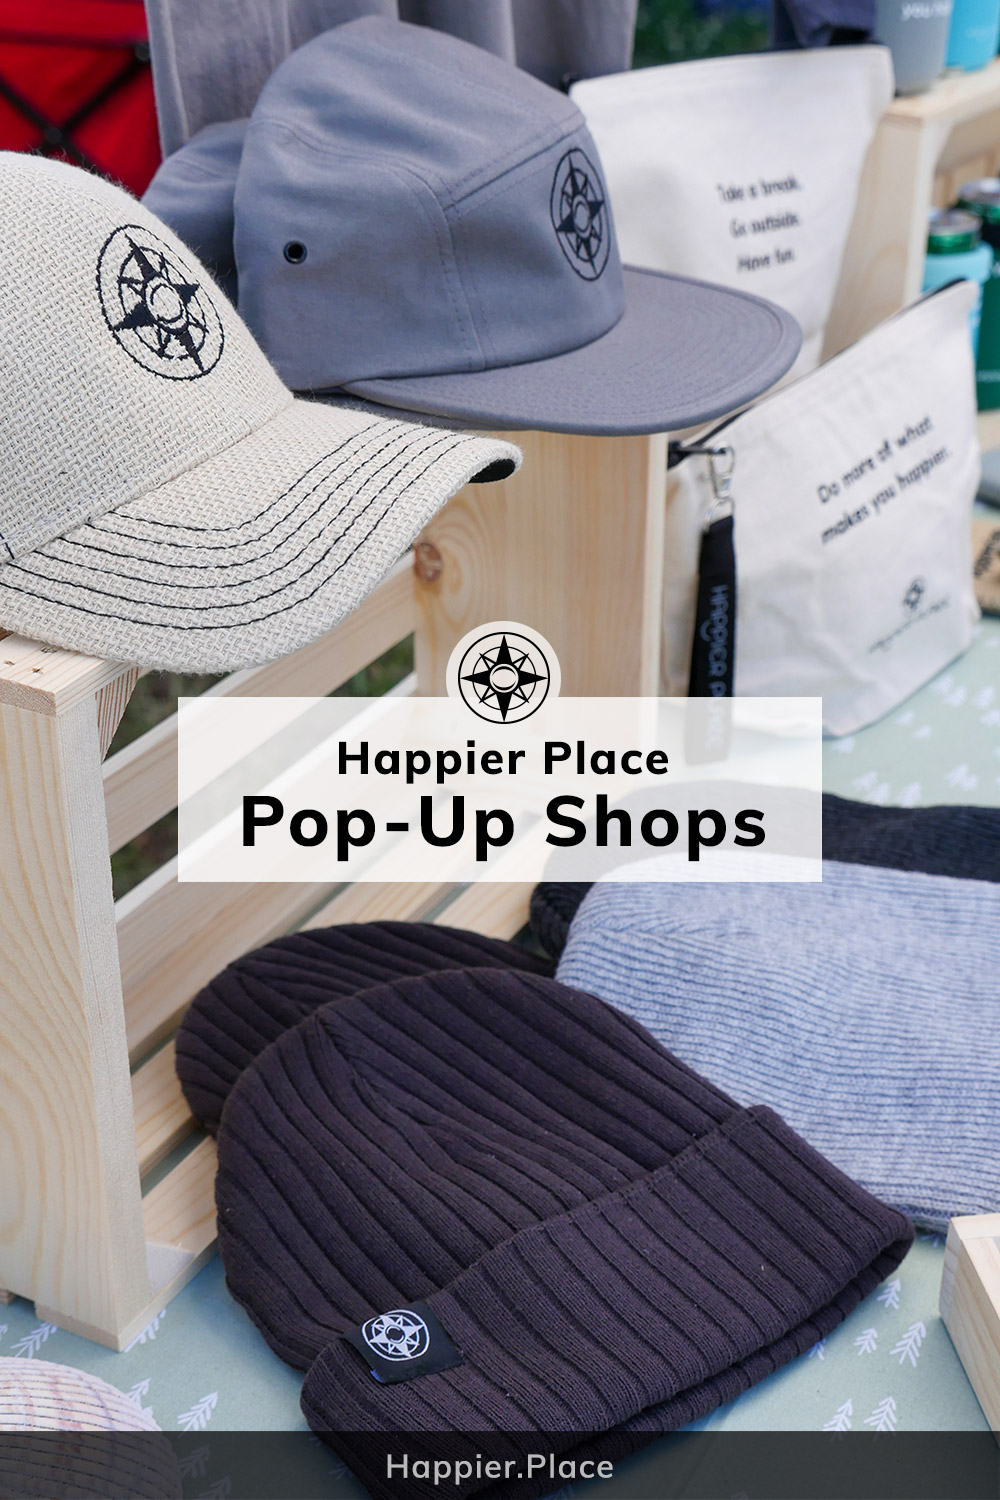 Happier Place Pop-up Shop featuring hats, bags and all the outdoor products to make your happy place better